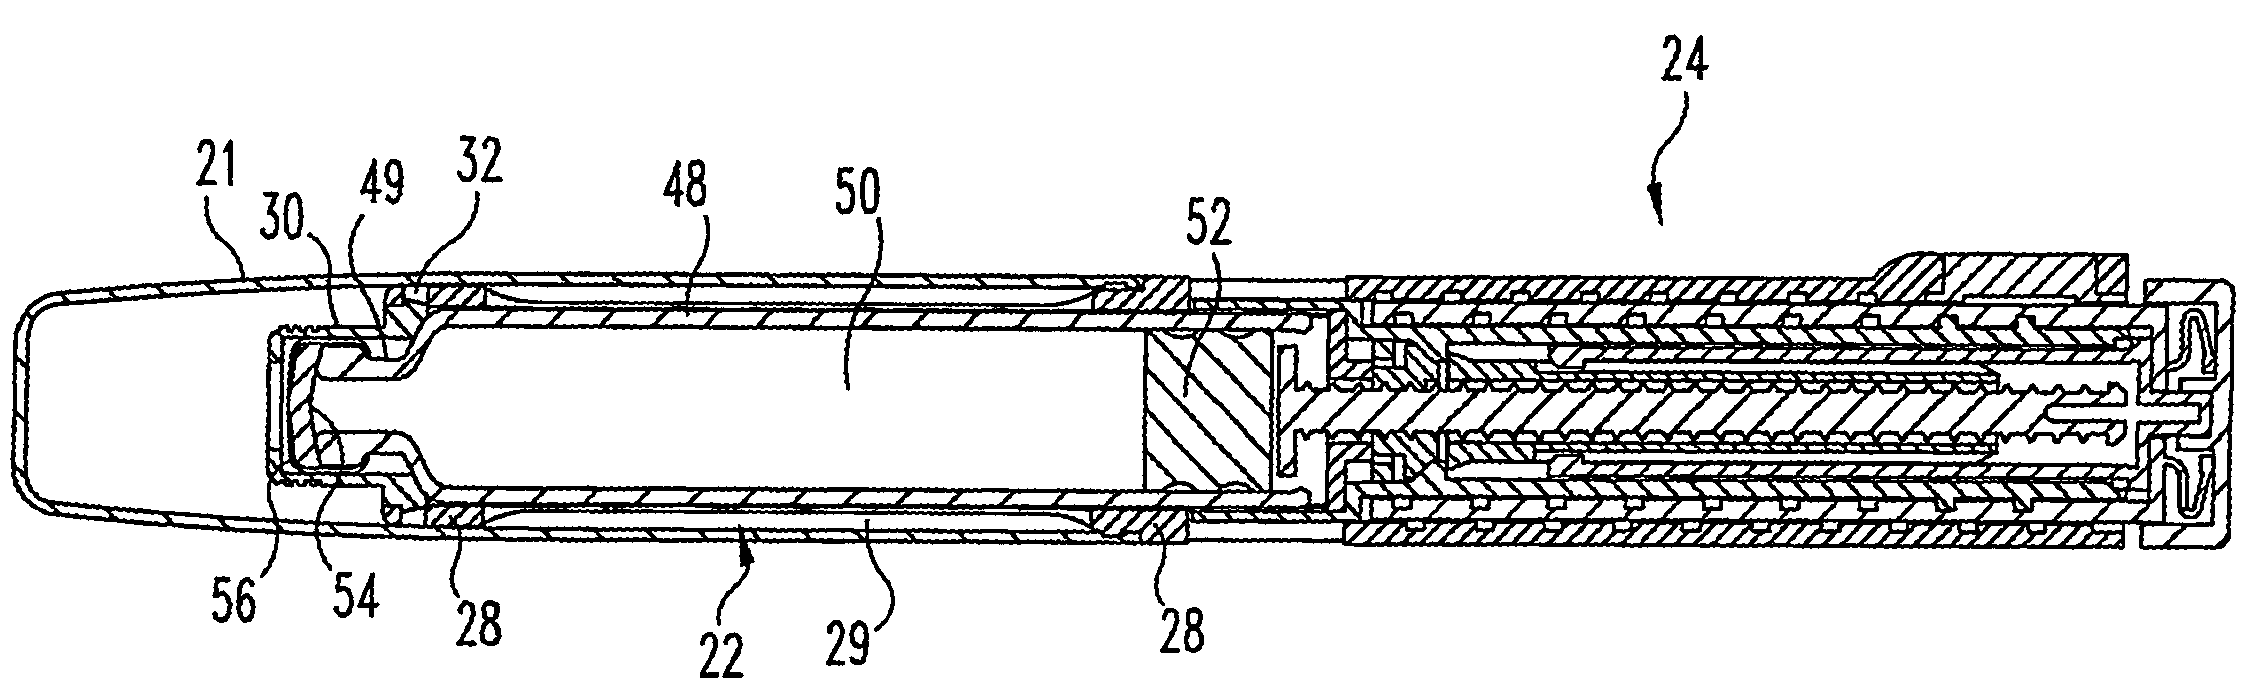 Medication dispensing apparatus with triple screw threads for mechanical advantage